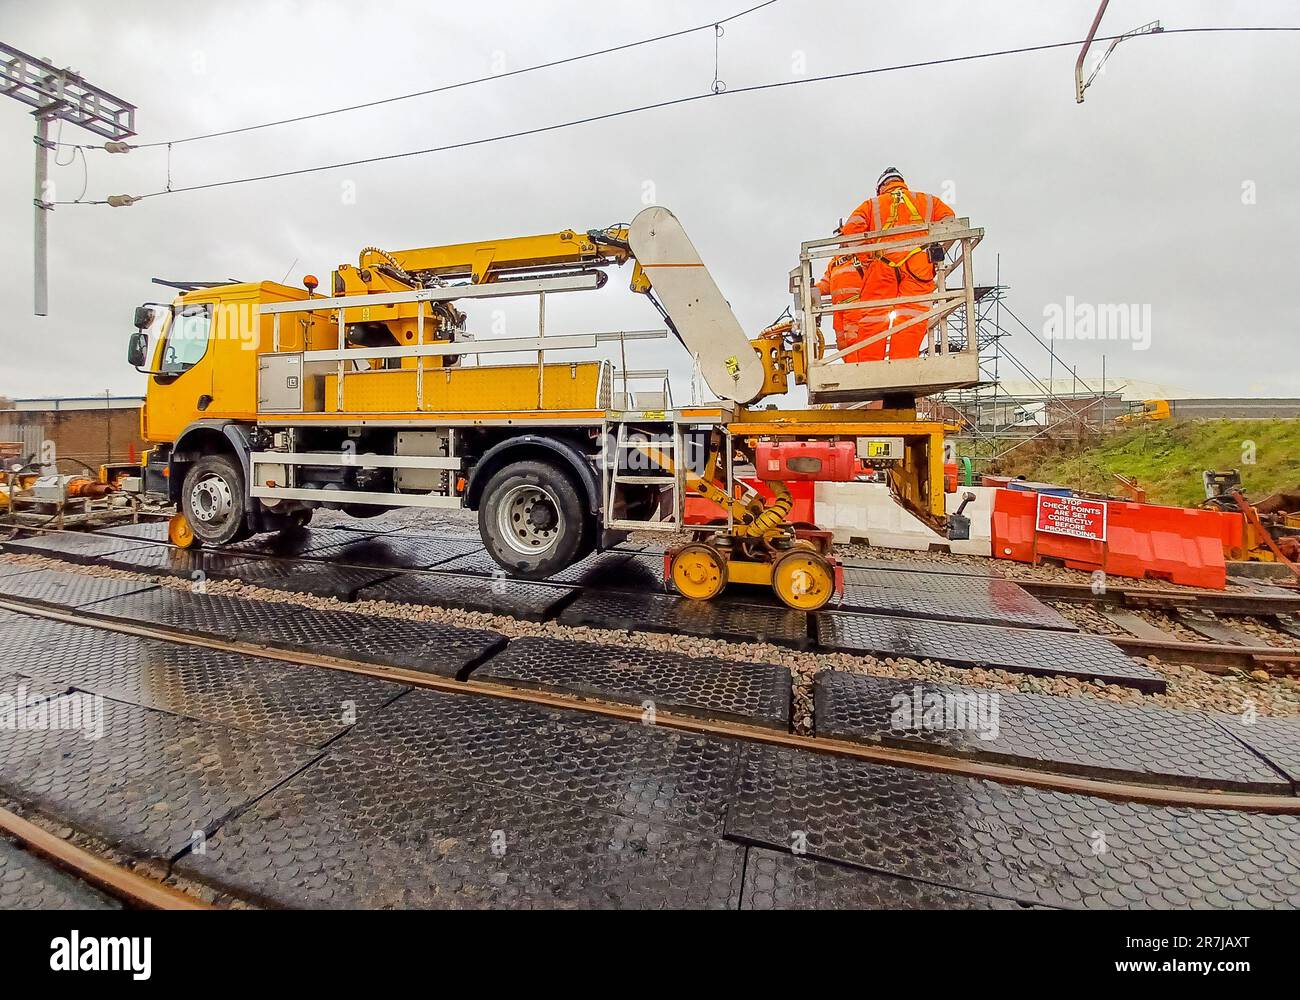 An engineering plant vehicle used to travel on the passenger / freight railway tracks giving access to engineers to work on the railway infrastructure Stock Photo